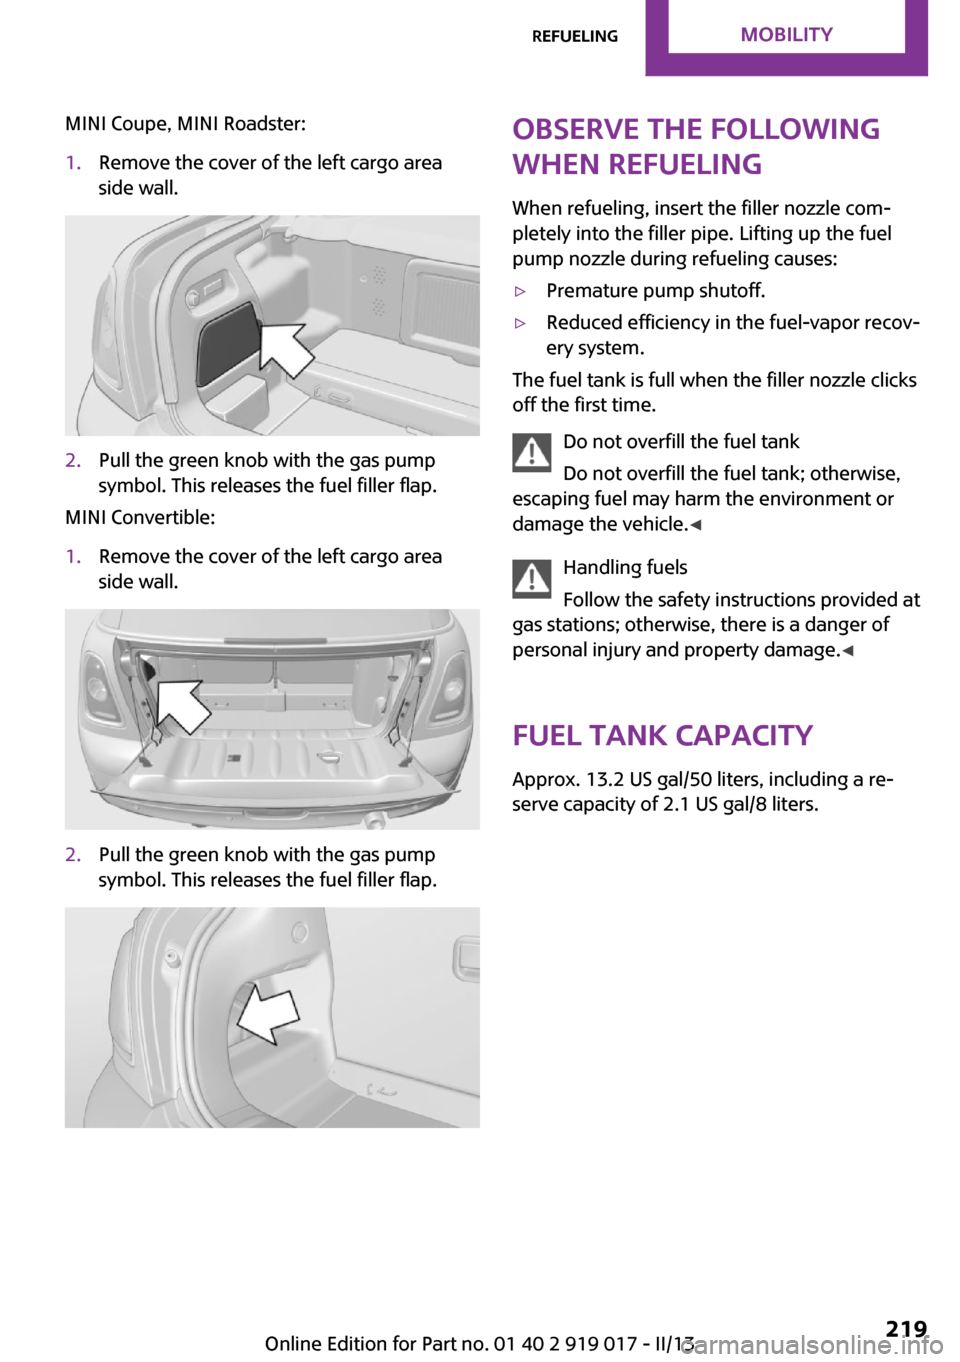 MINI Roadster 2013  Owners Manual MINI Coupe, MINI Roadster:1.Remove the cover of the left cargo area
side wall.2.Pull the green knob with the gas pump
symbol. This releases the fuel filler flap.
MINI Convertible:
1.Remove the cover o